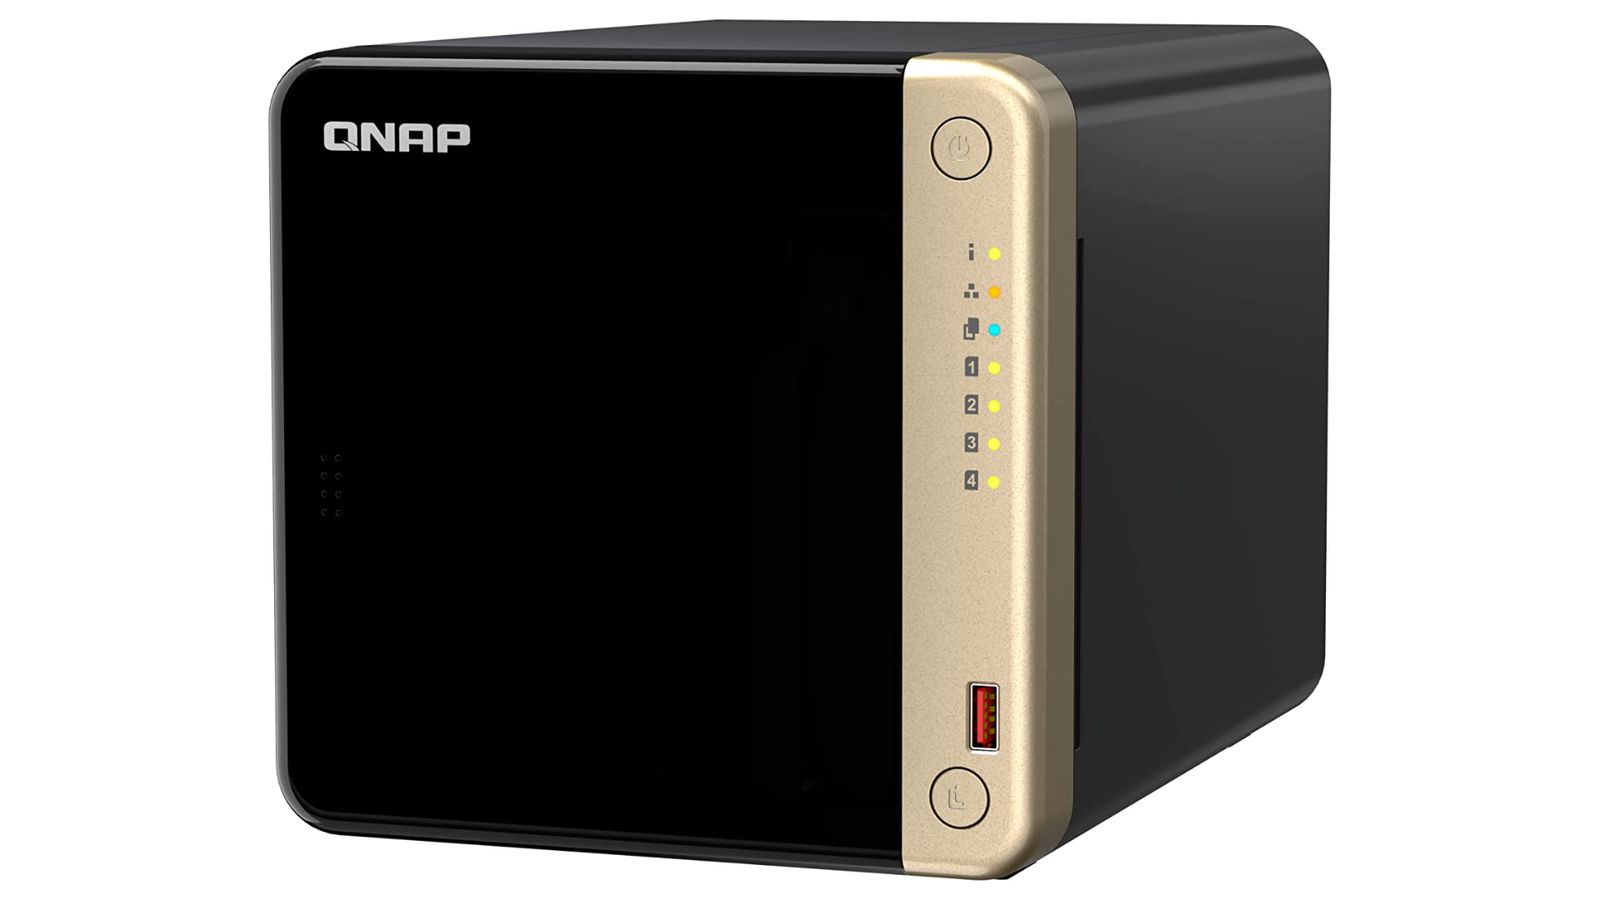 QNAP TS-464 product image with a golden side strip on a gloss black front panel with a red USB input in the bottom-right.